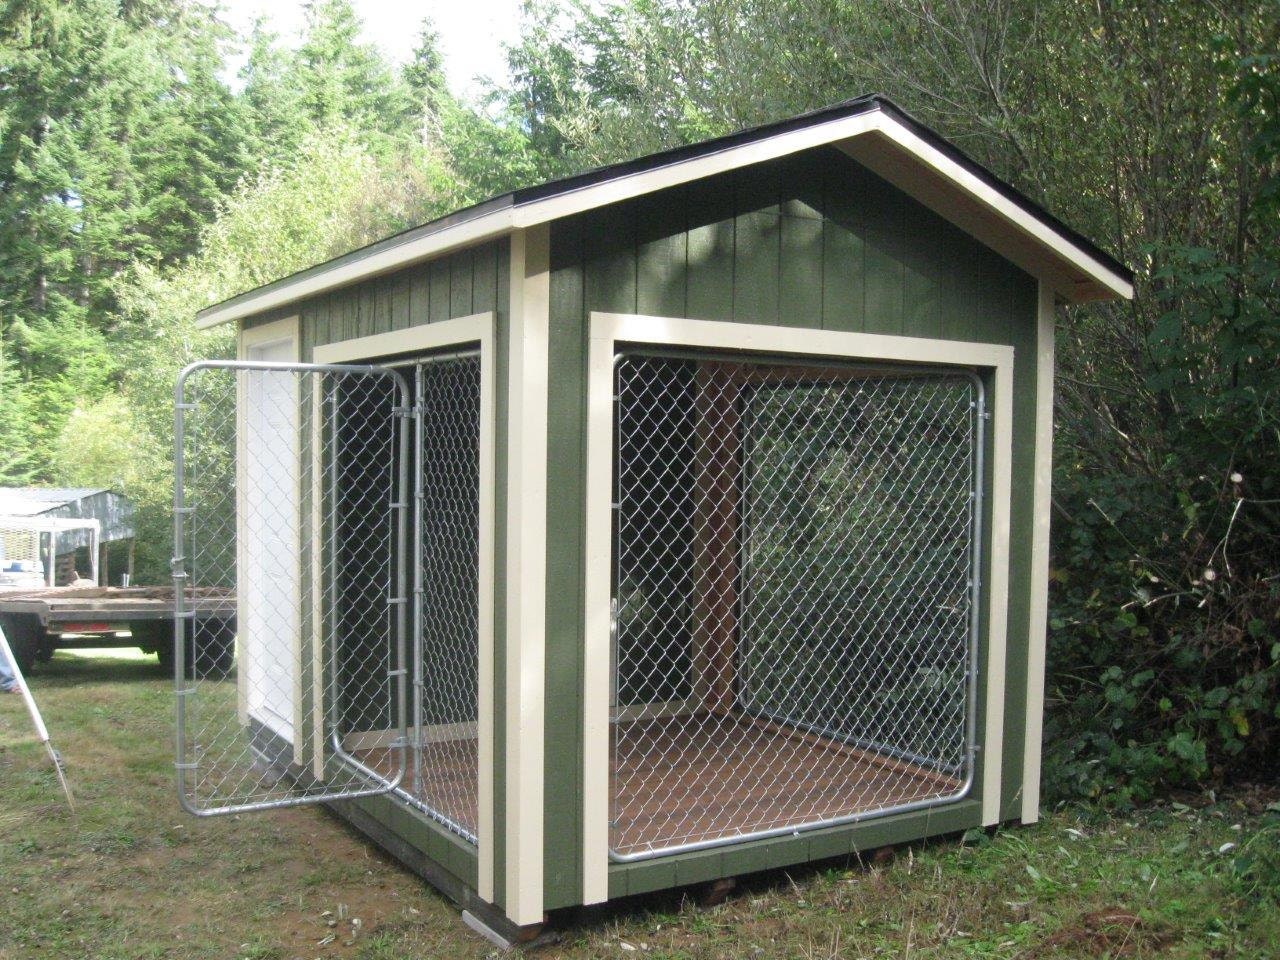 8x12 k9 Kennel with 4x8 dog house and 8x8 kennel built to